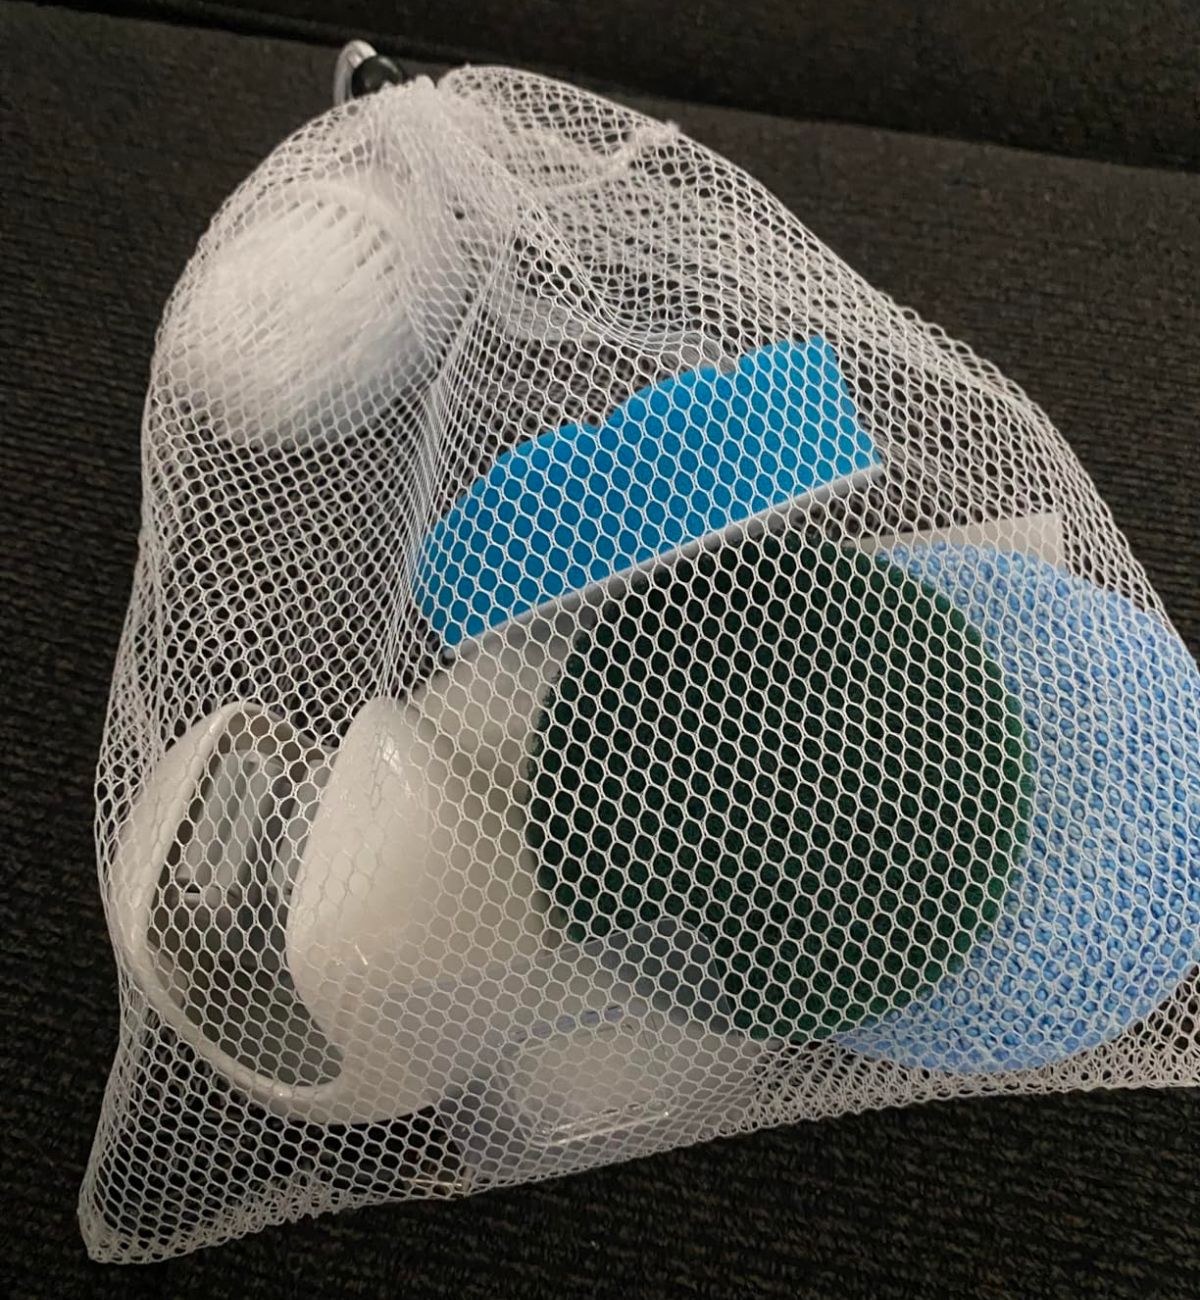 Cordless spin brush attachments in a mesh bag